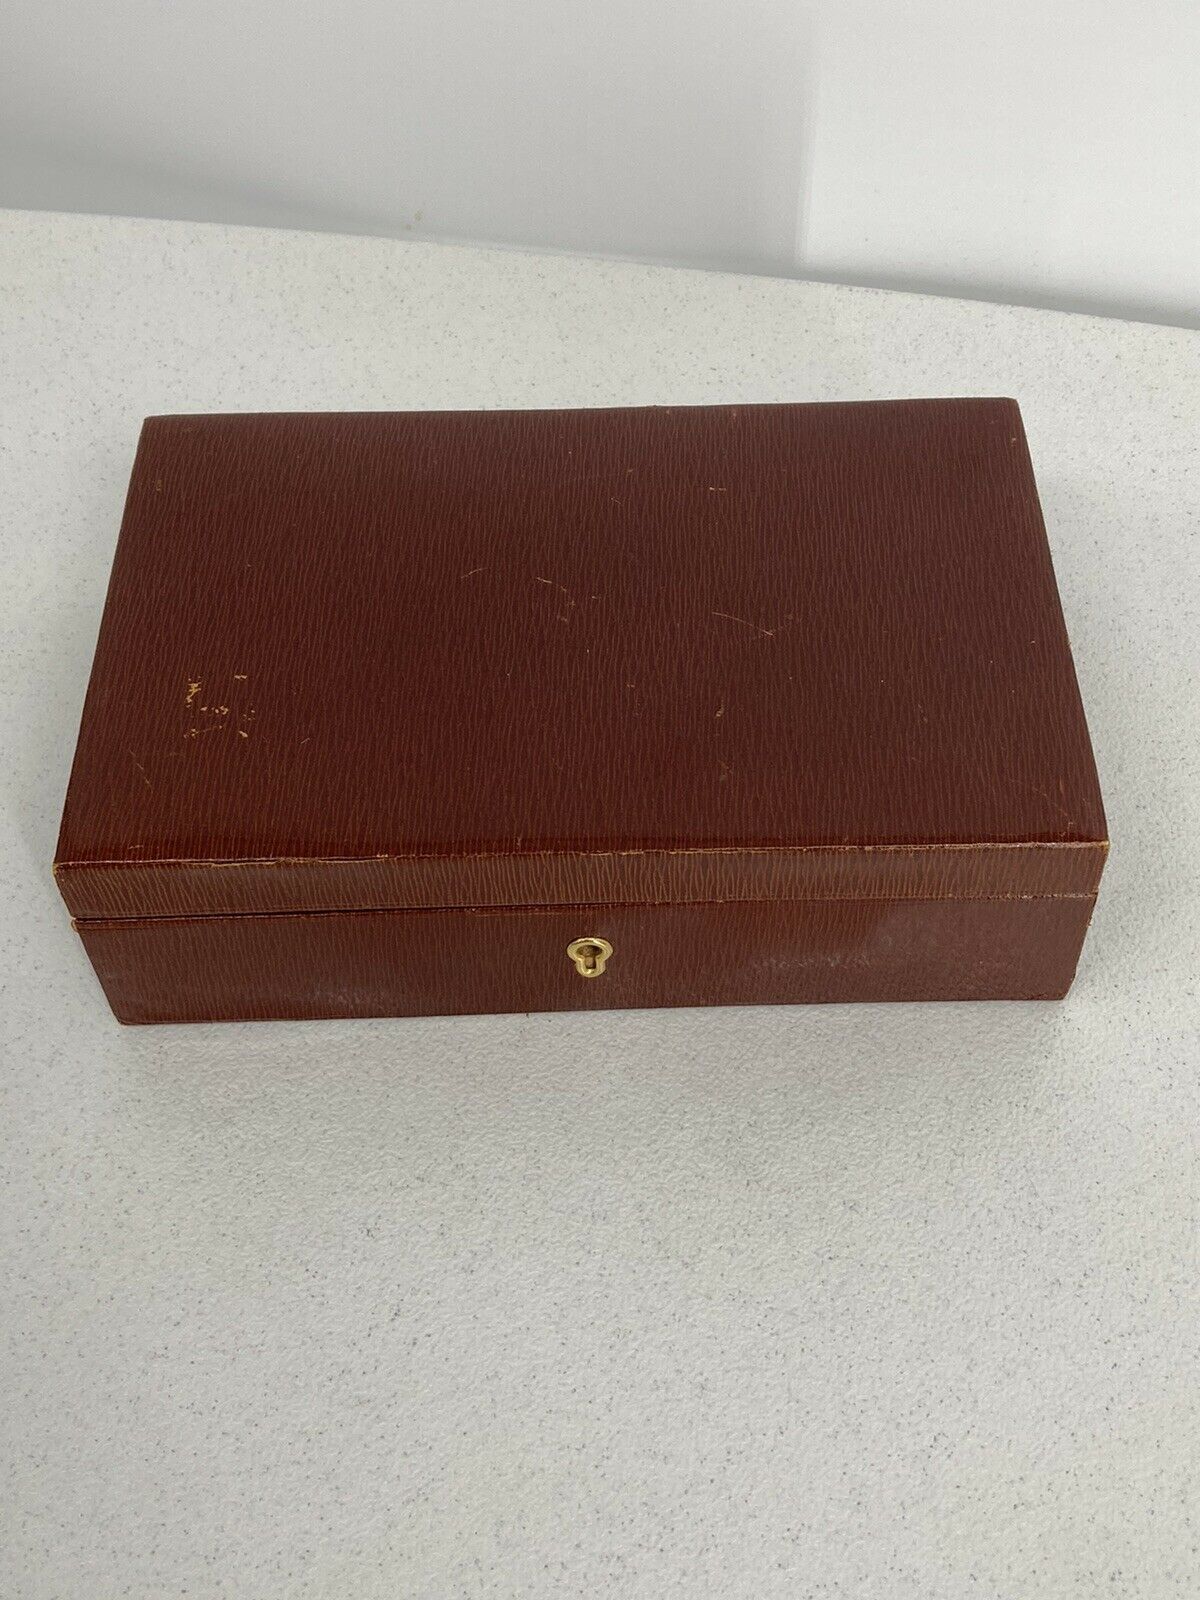 Vintage Satin Lined Jewelry Box Made Expressly For Lord & Taylor